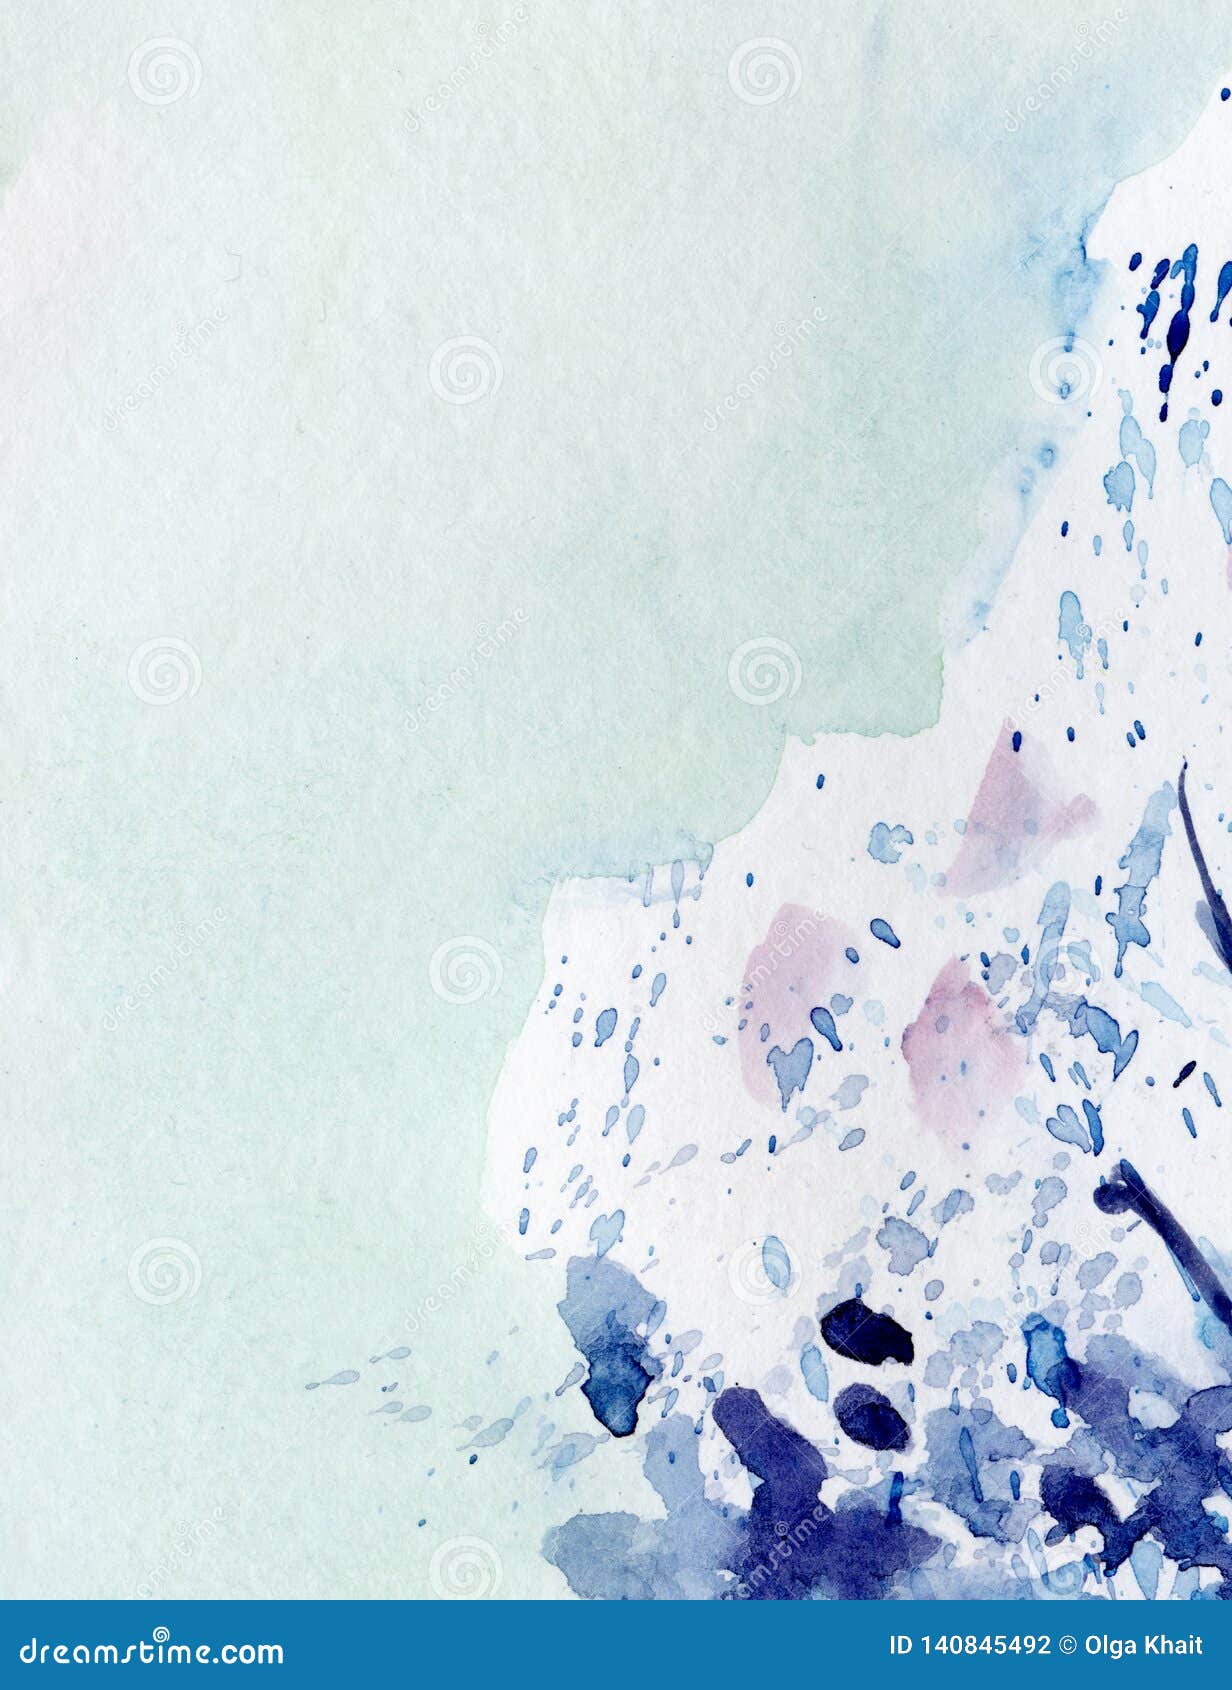 abstract background in blue-green turquoise gamut. light greenish background fill, bright and dark blue spots. hand-drawn